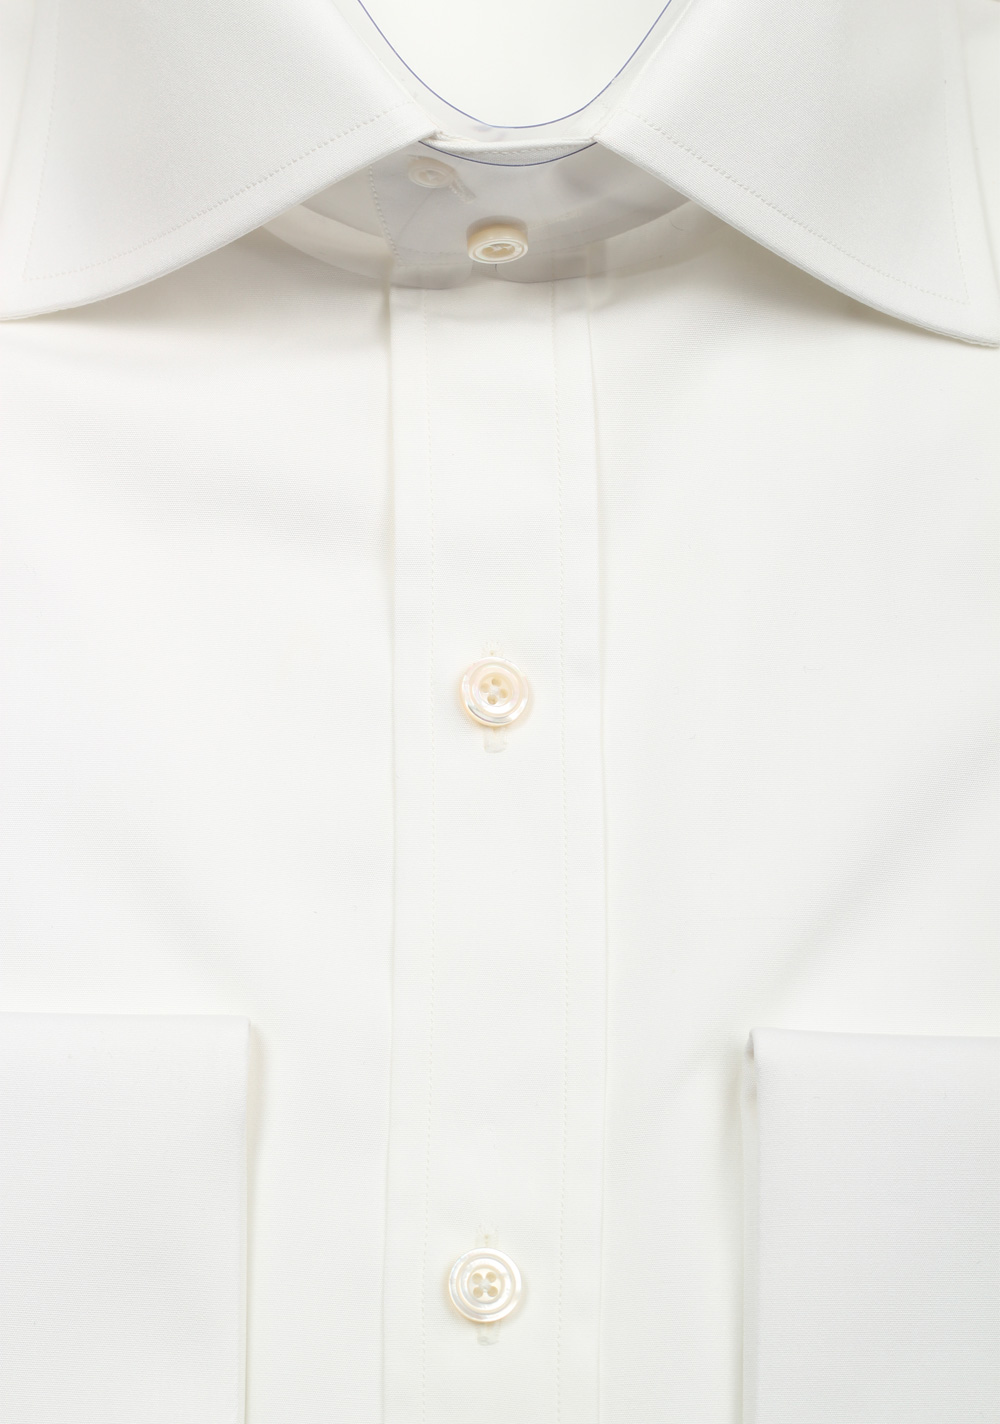 TOM FORD Solid White Dress Shirt French Cuffs Size 41 / 16 U.S. Slim Fit | Costume Limité